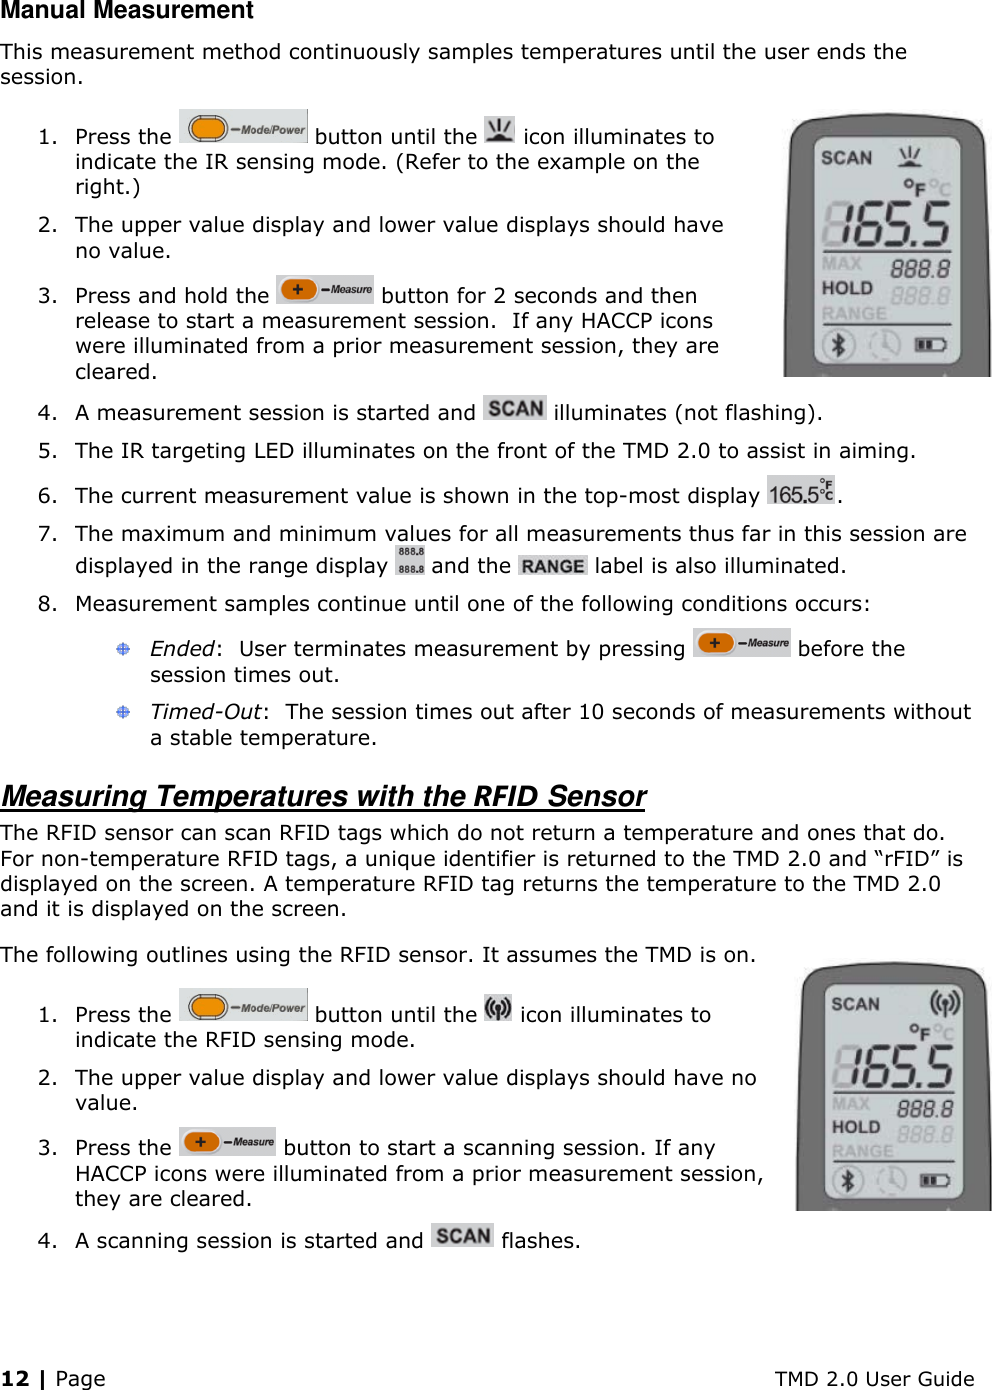 12 | Page    TMD 2.0 User Guide Manual Measurement This measurement method continuously samples temperatures until the user ends the session. 1. Press the   button until the   icon illuminates to indicate the IR sensing mode. (Refer to the example on the right.) 2. The upper value display and lower value displays should have no value. 3. Press and hold the   button for 2 seconds and then release to start a measurement session.  If any HACCP icons were illuminated from a prior measurement session, they are cleared. 4. A measurement session is started and   illuminates (not flashing). 5. The IR targeting LED illuminates on the front of the TMD 2.0 to assist in aiming. 6. The current measurement value is shown in the top-most display  .  7. The maximum and minimum values for all measurements thus far in this session are displayed in the range display   and the   label is also illuminated. 8. Measurement samples continue until one of the following conditions occurs:  Ended:  User terminates measurement by pressing   before the session times out.  Timed-Out:  The session times out after 10 seconds of measurements without a stable temperature. Measuring Temperatures with the RFID Sensor The RFID sensor can scan RFID tags which do not return a temperature and ones that do. For non-temperature RFID tags, a unique identifier is returned to the TMD 2.0 and “rFID” is displayed on the screen. A temperature RFID tag returns the temperature to the TMD 2.0 and it is displayed on the screen.  The following outlines using the RFID sensor. It assumes the TMD is on. 1. Press the   button until the   icon illuminates to indicate the RFID sensing mode.  2. The upper value display and lower value displays should have no value. 3. Press the   button to start a scanning session. If any HACCP icons were illuminated from a prior measurement session, they are cleared. 4. A scanning session is started and   flashes. 